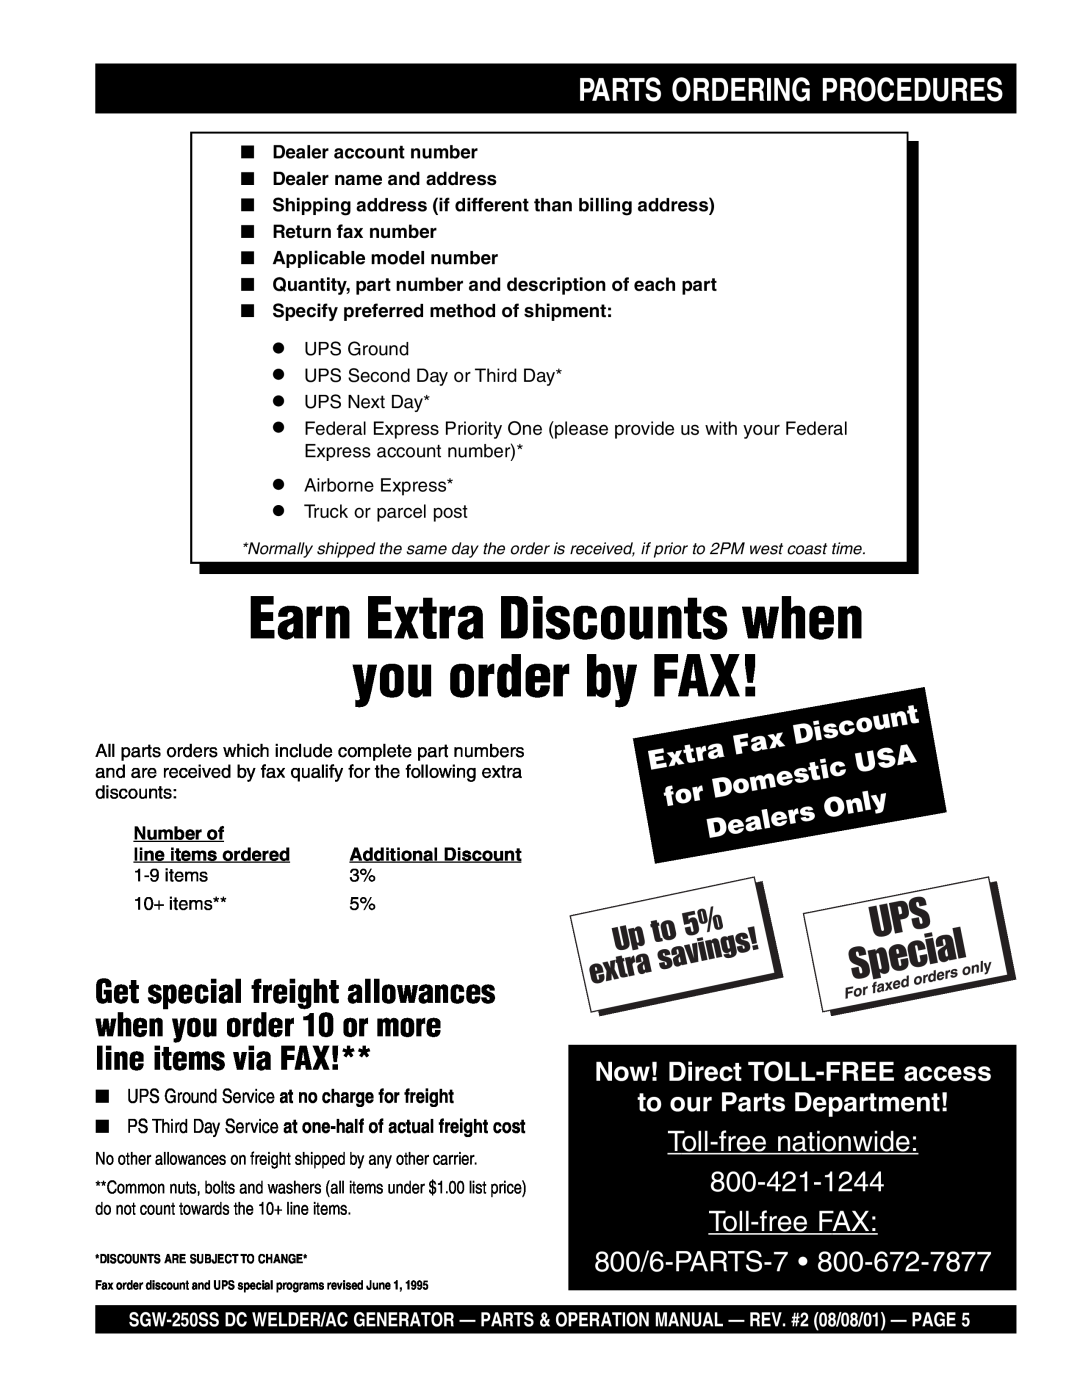 Multiquip SGW-250SS Earn Extra Discounts when you order by FAX, Parts Ordering Procedures, Domestic, Only, Dealers 